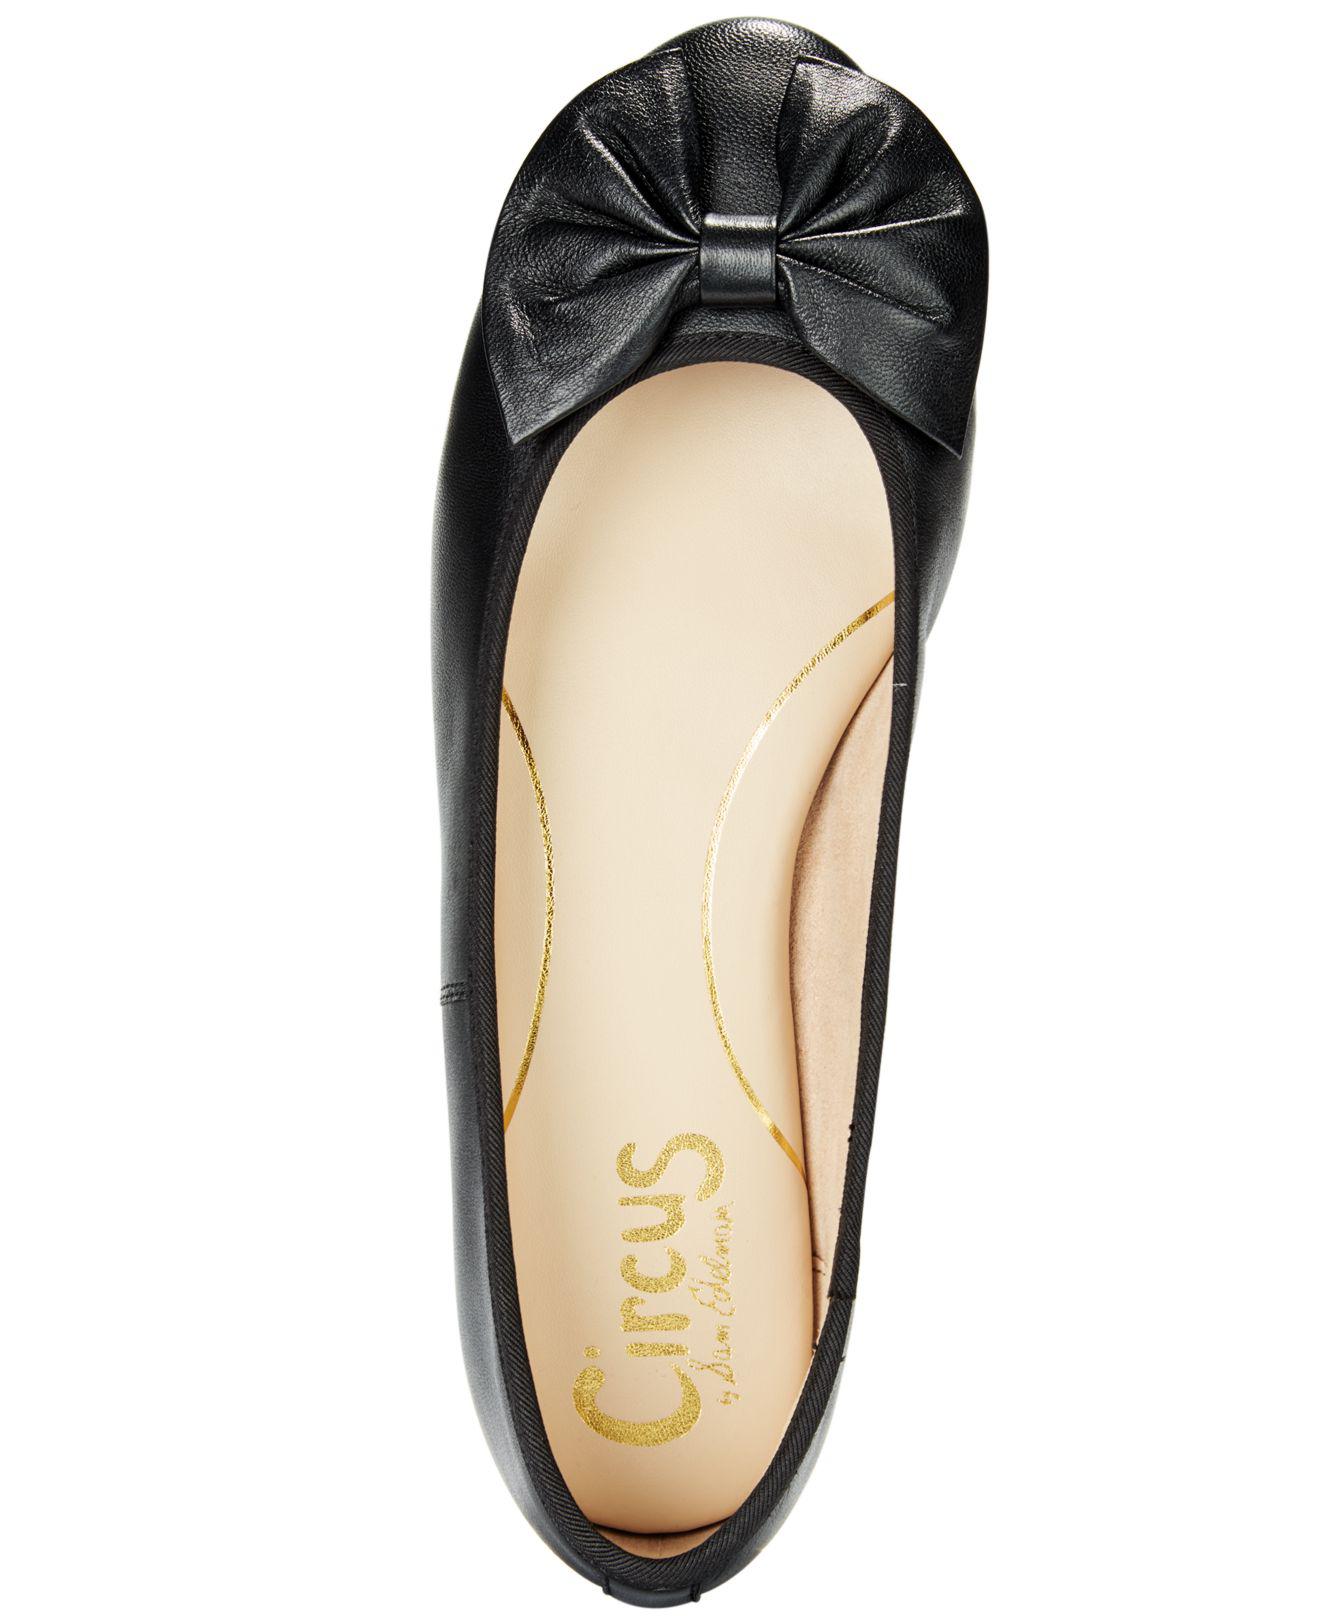 Circus by Sam Edelman Leather Ciera Bow Ballet Flats in Black - Lyst